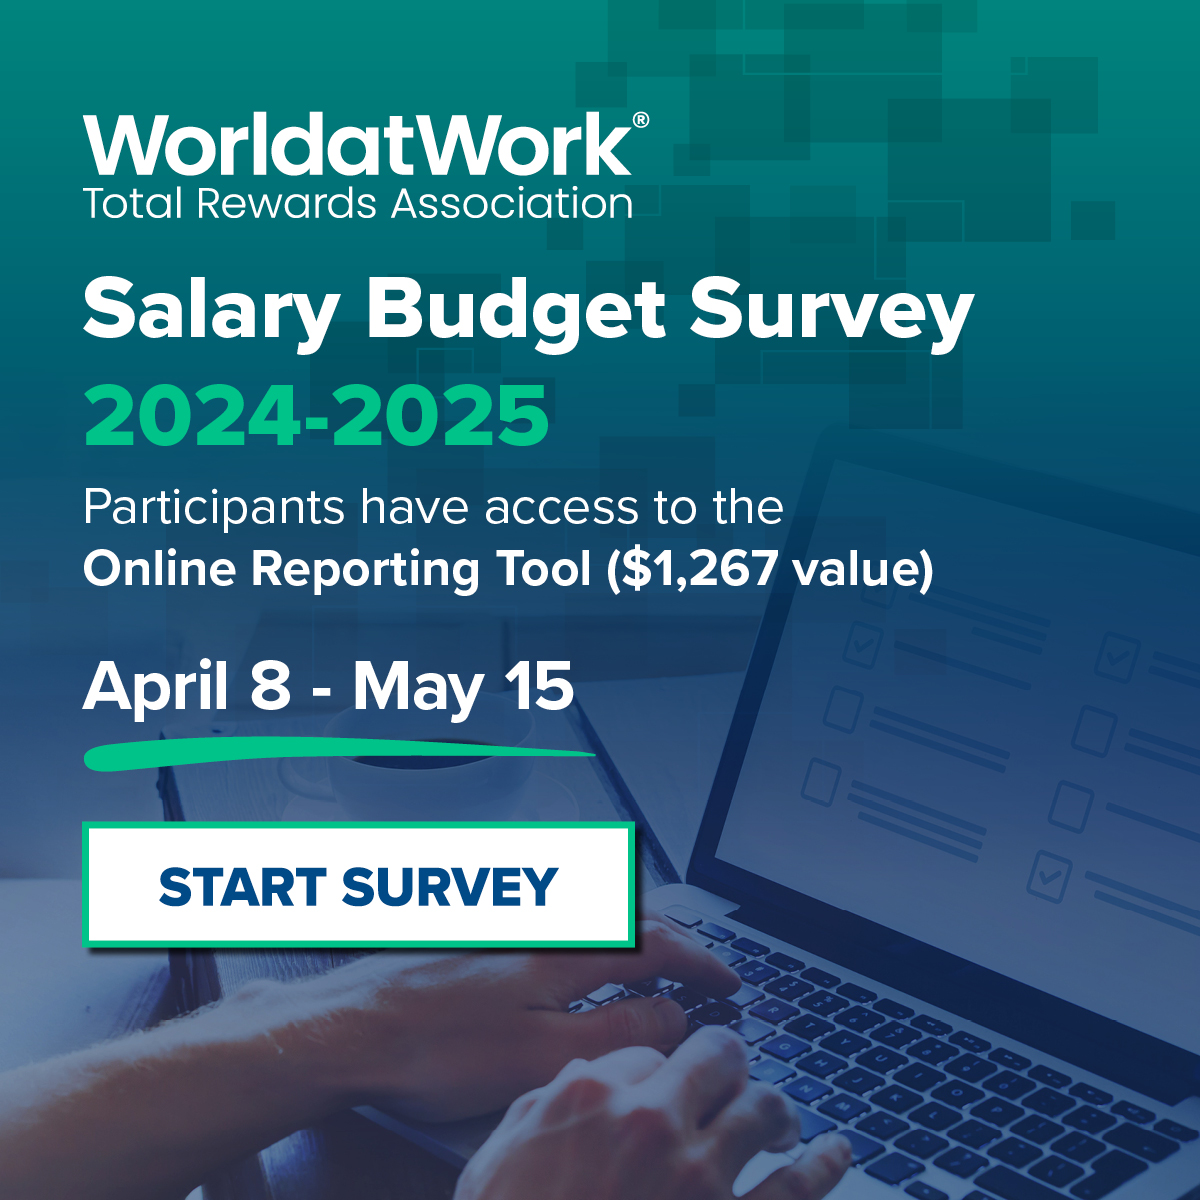 Attention global #HRProfessionals! Join @WorldatWork's Salary Budget Survey to receive a FREE Executive Report from 25 countries & save 70% on the Online Reporting Tool. Tailor your comp strategies effectively! Participate today! bit.ly/3JCLwCi #CompensationStrategy